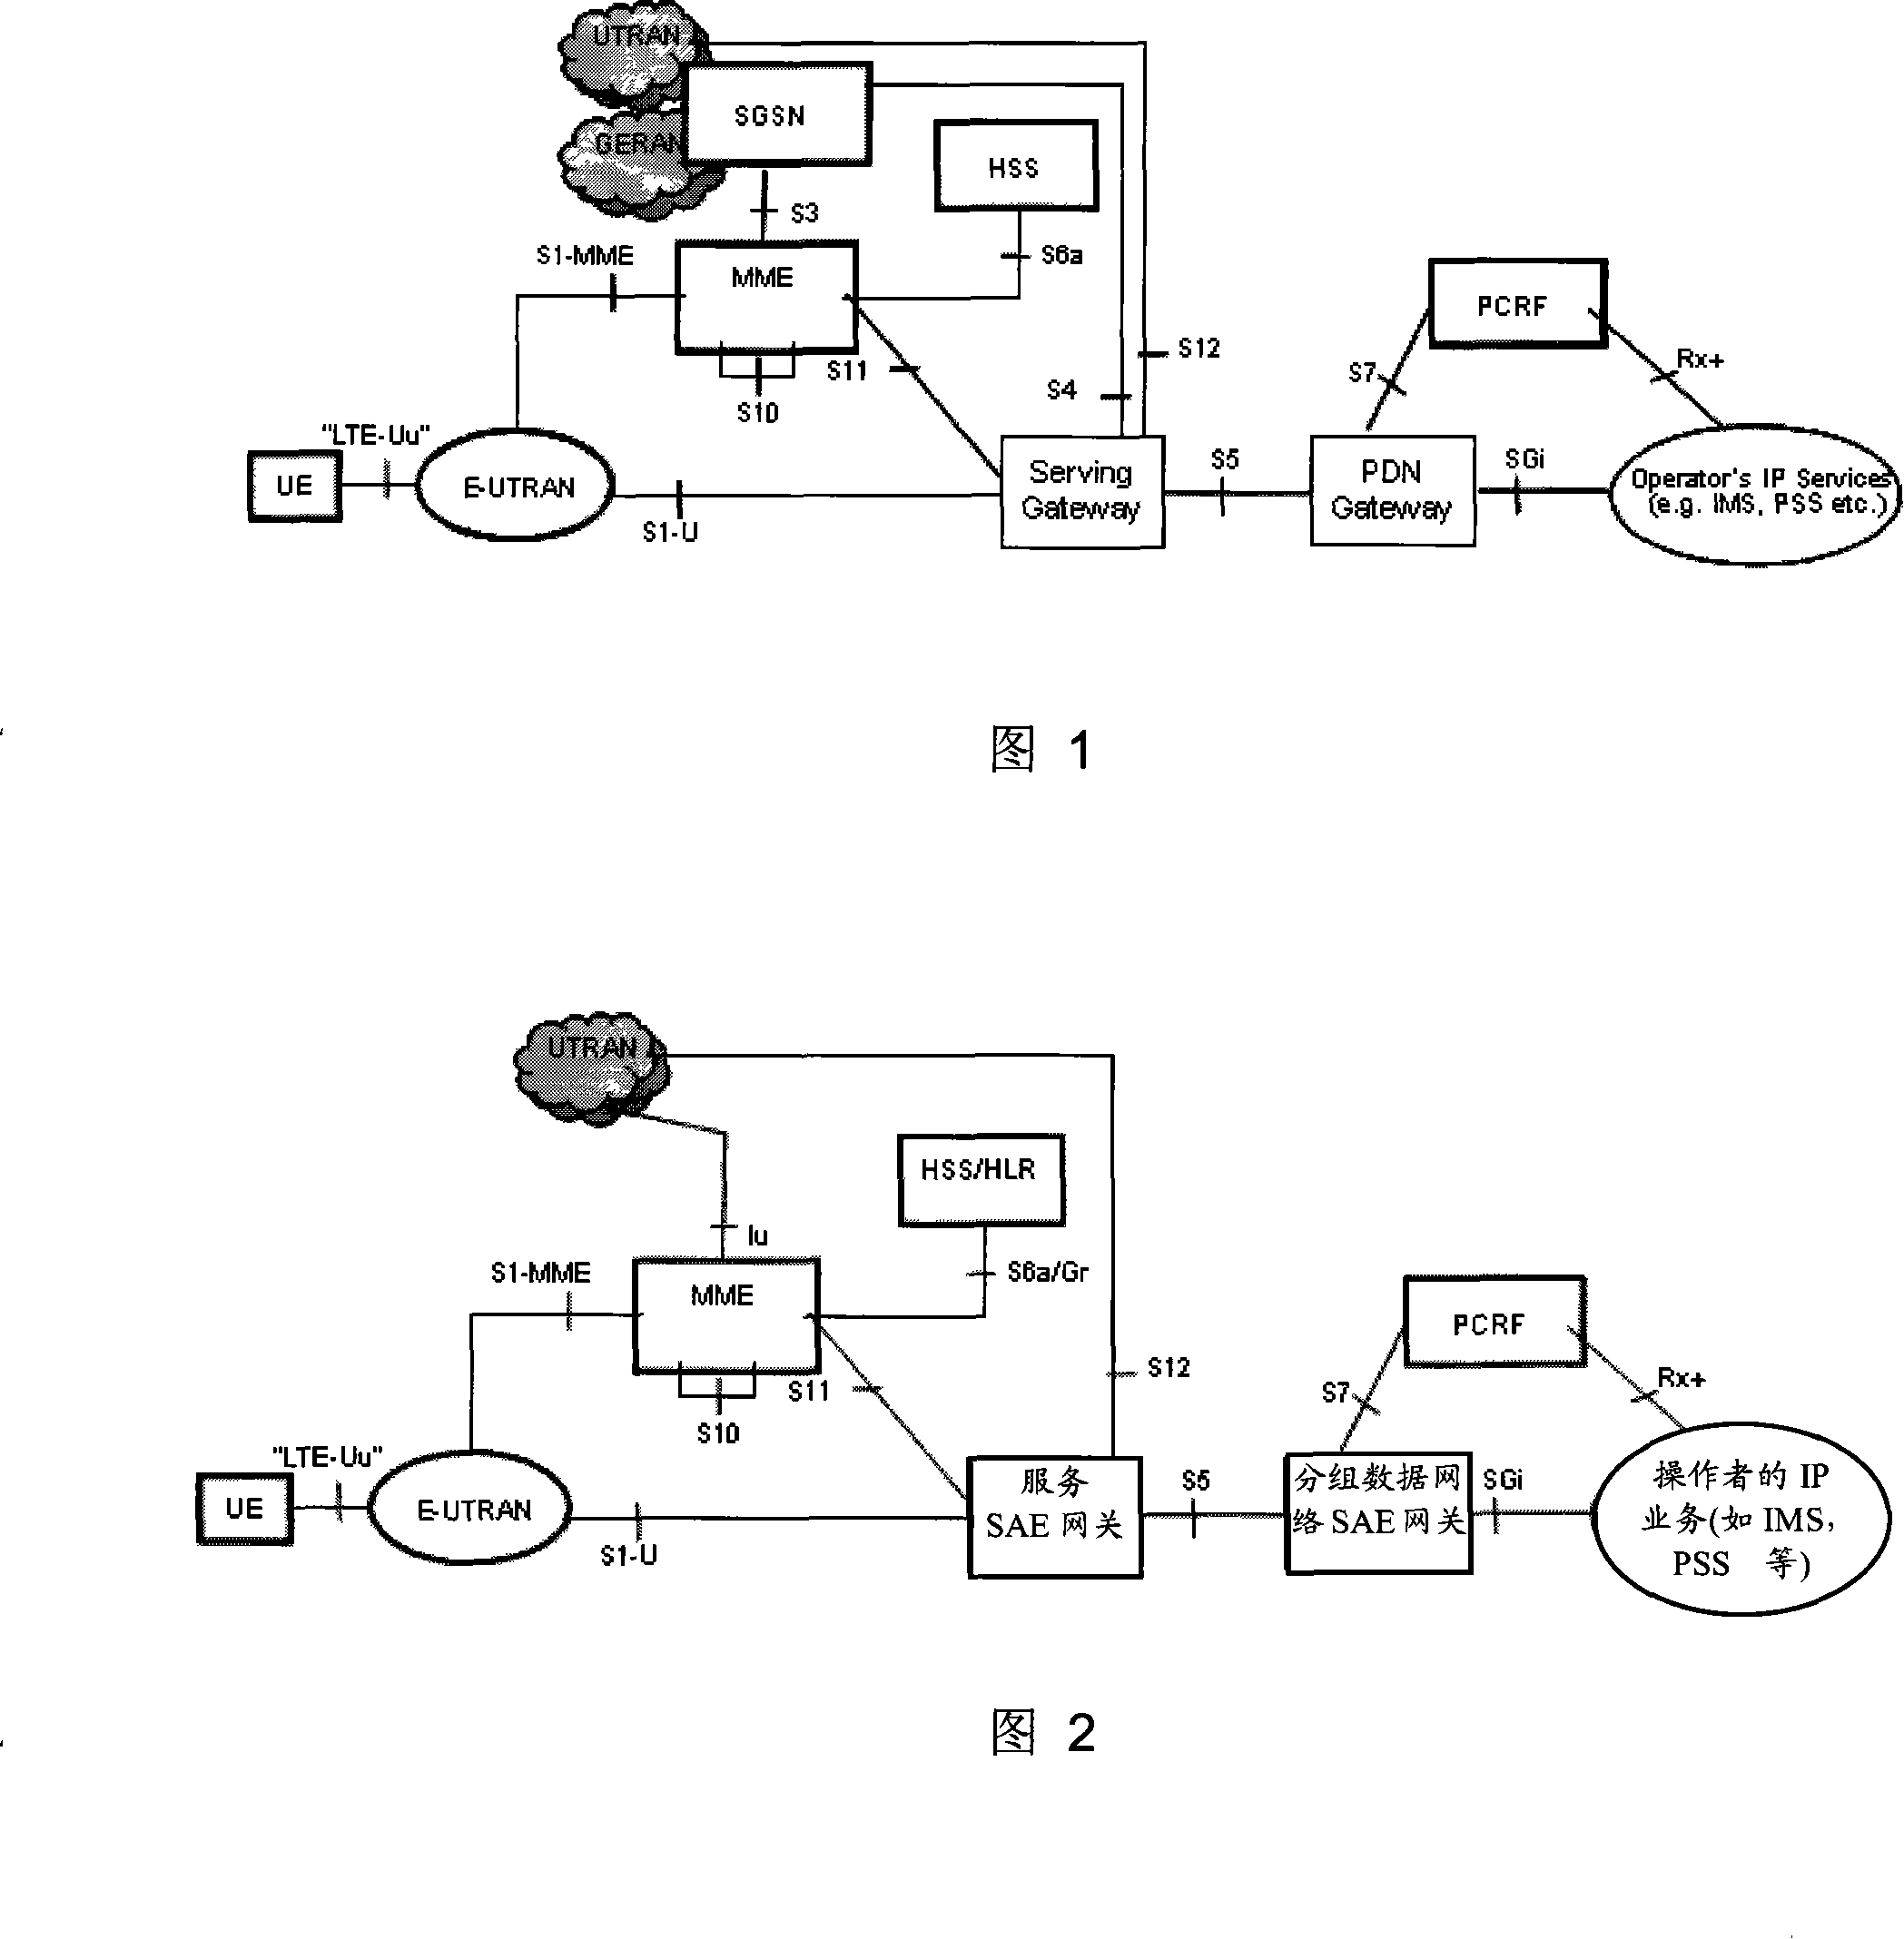 Apparatus, system and method for accessing SAE core network